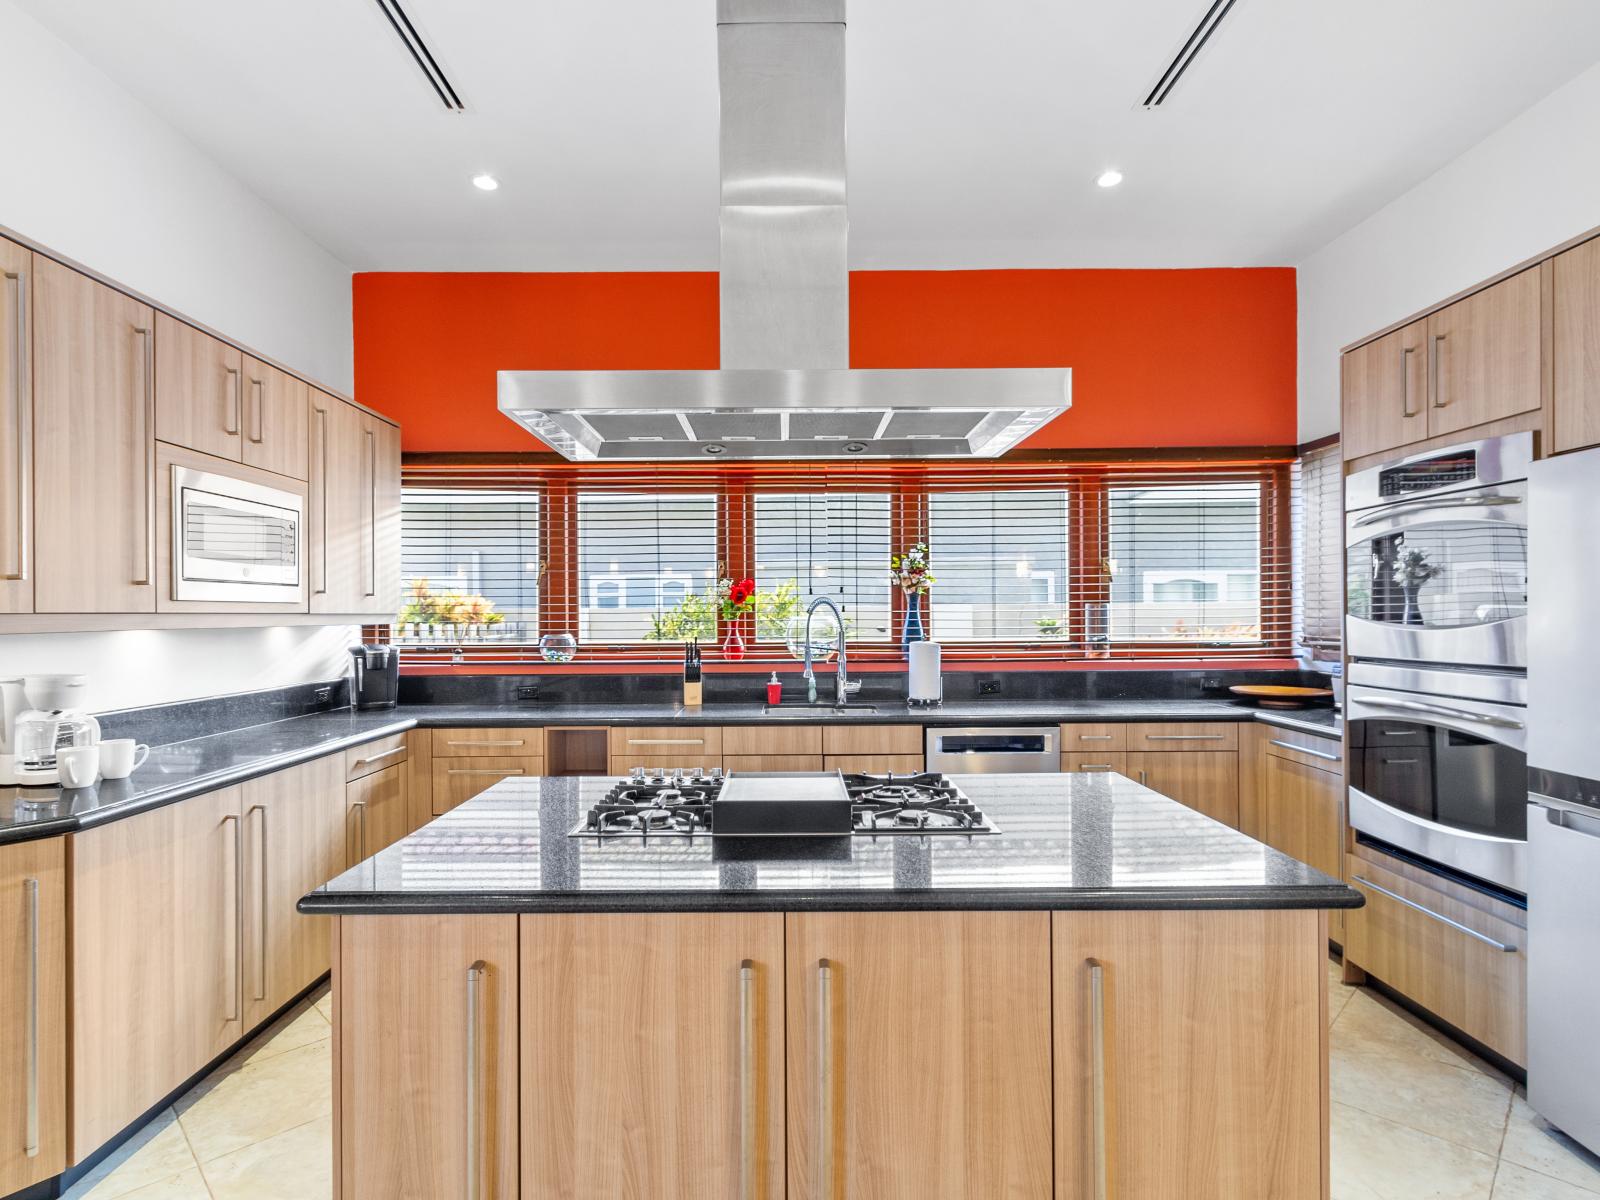 Kitchen features granite countertops, stainless steel appliances, and pristine white cabinetry